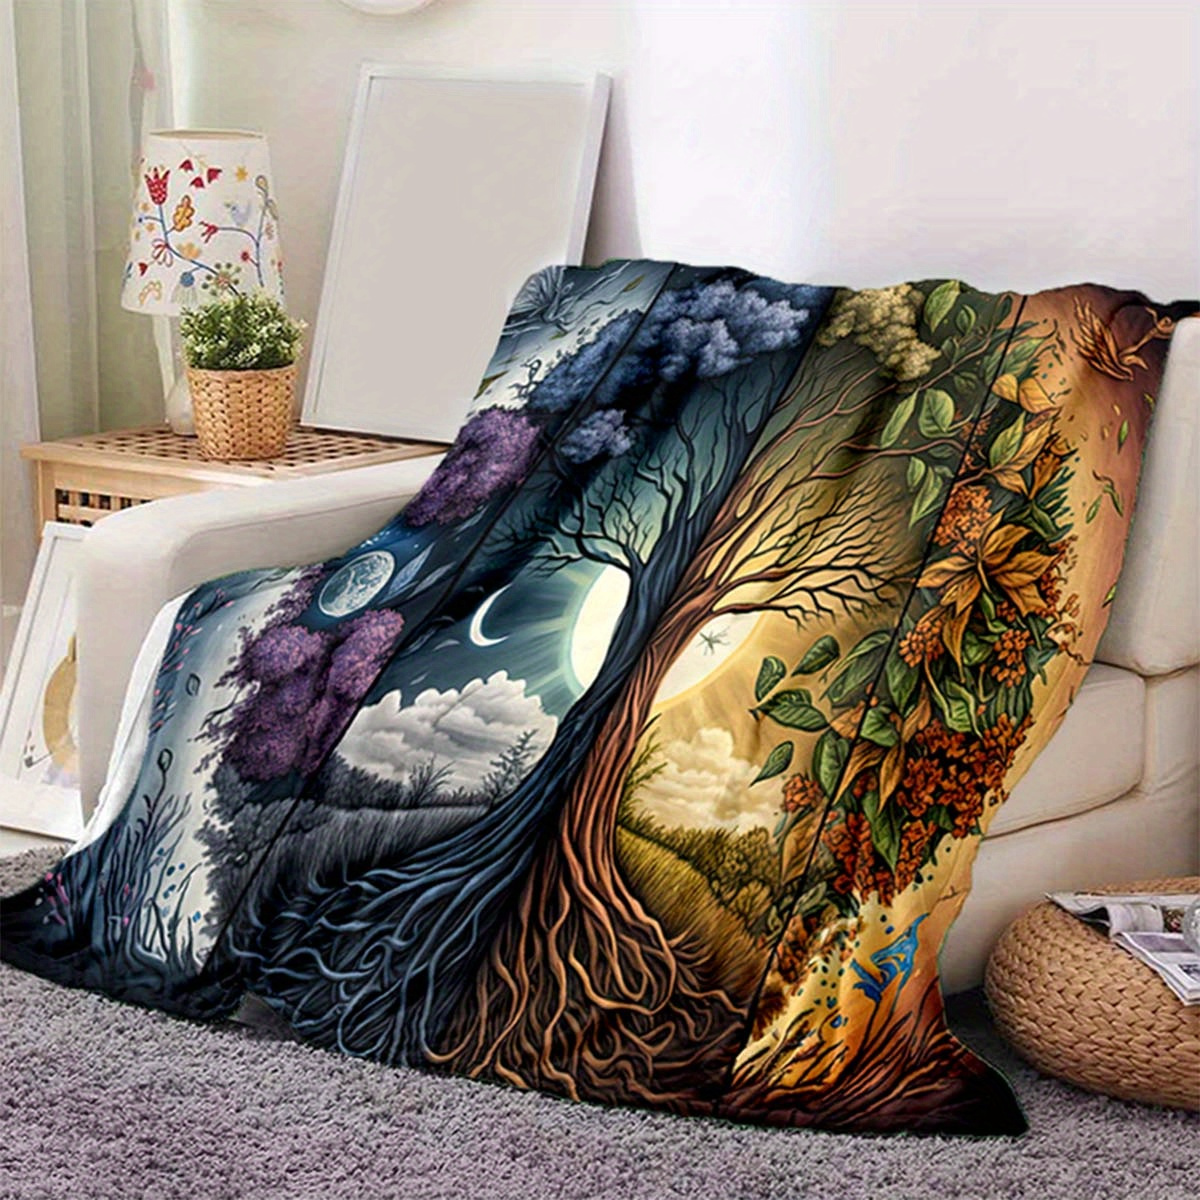 

3d Tree Of Life Soft Flannel Throw Blanket For Living Room Bedroom Bed Sofa Picnic Cover Decor Napping Couch Chair Cover